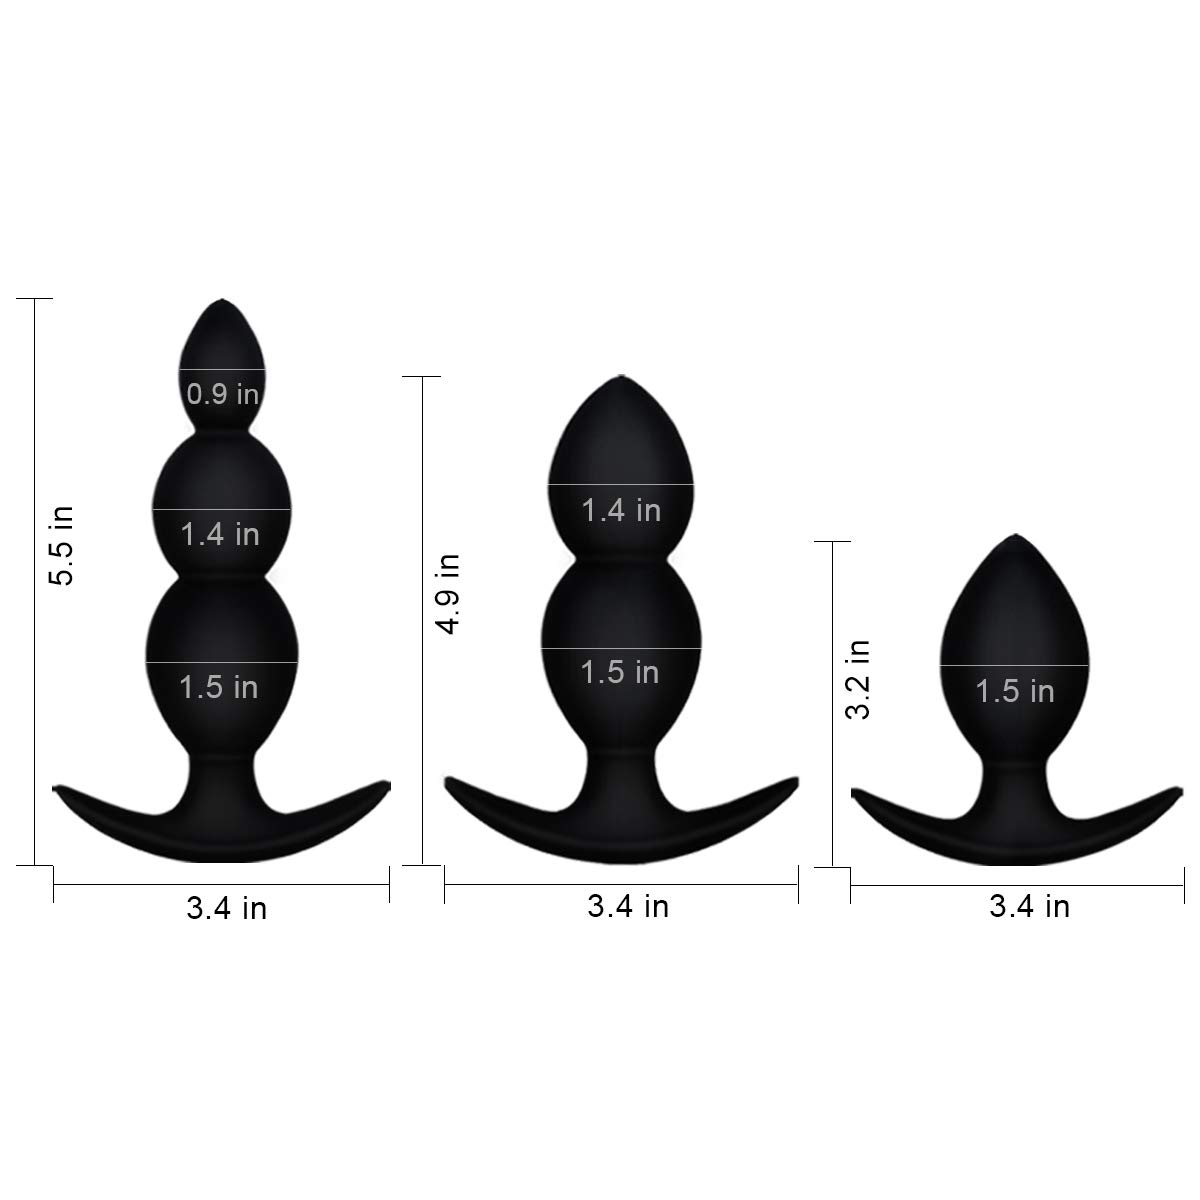 Black Bunny Anal - Butt Plug Sexploration: The 31 Best Butt Plugs and Anal Toys ...